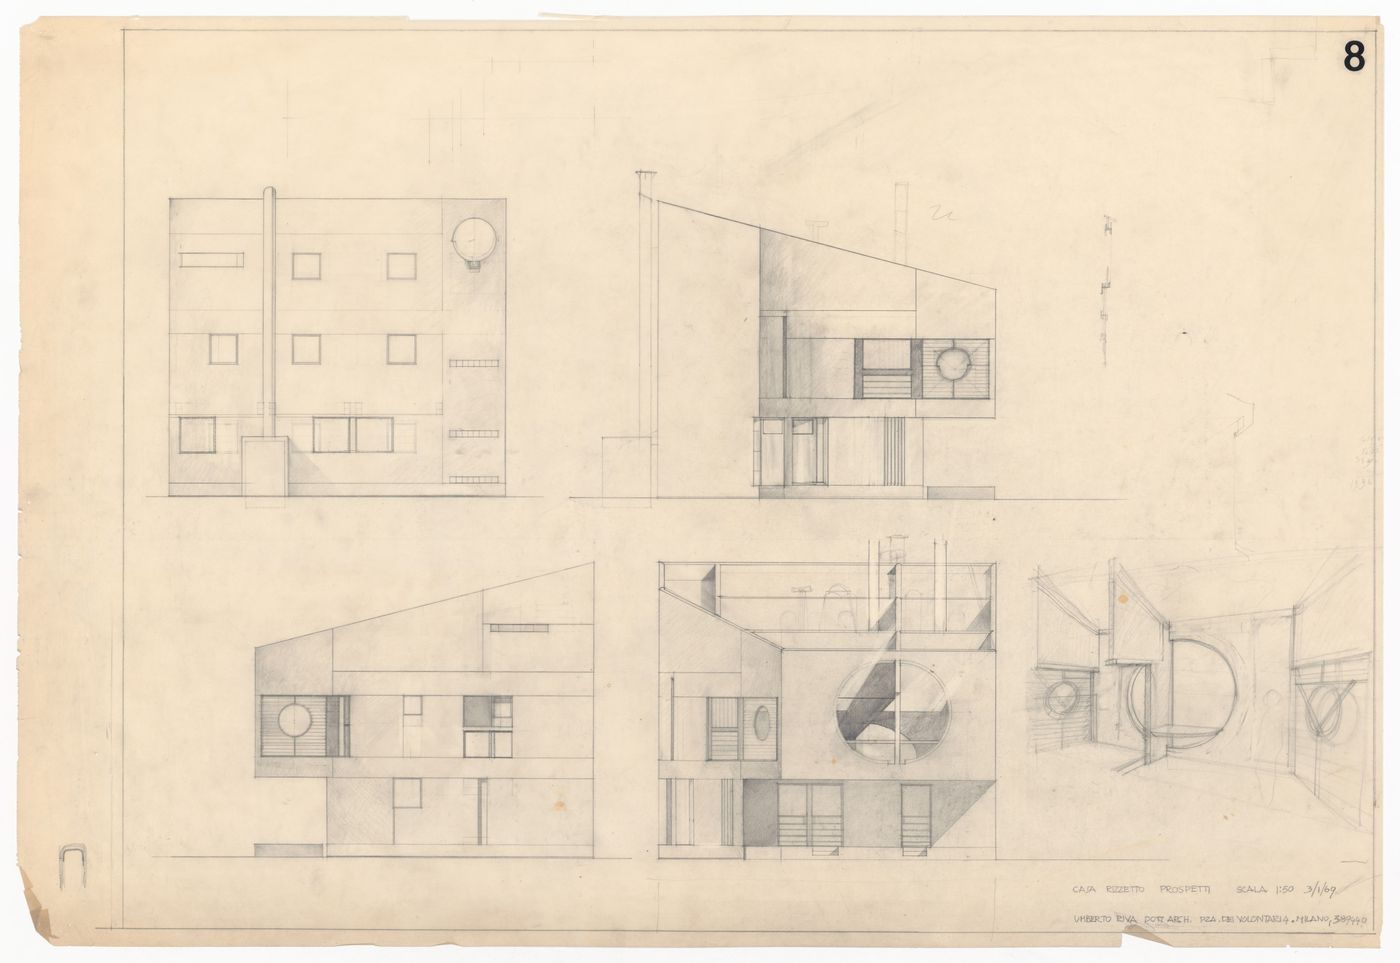 Exterior elevations and perspective view for Casa Rizzetto, Caorle, Italy